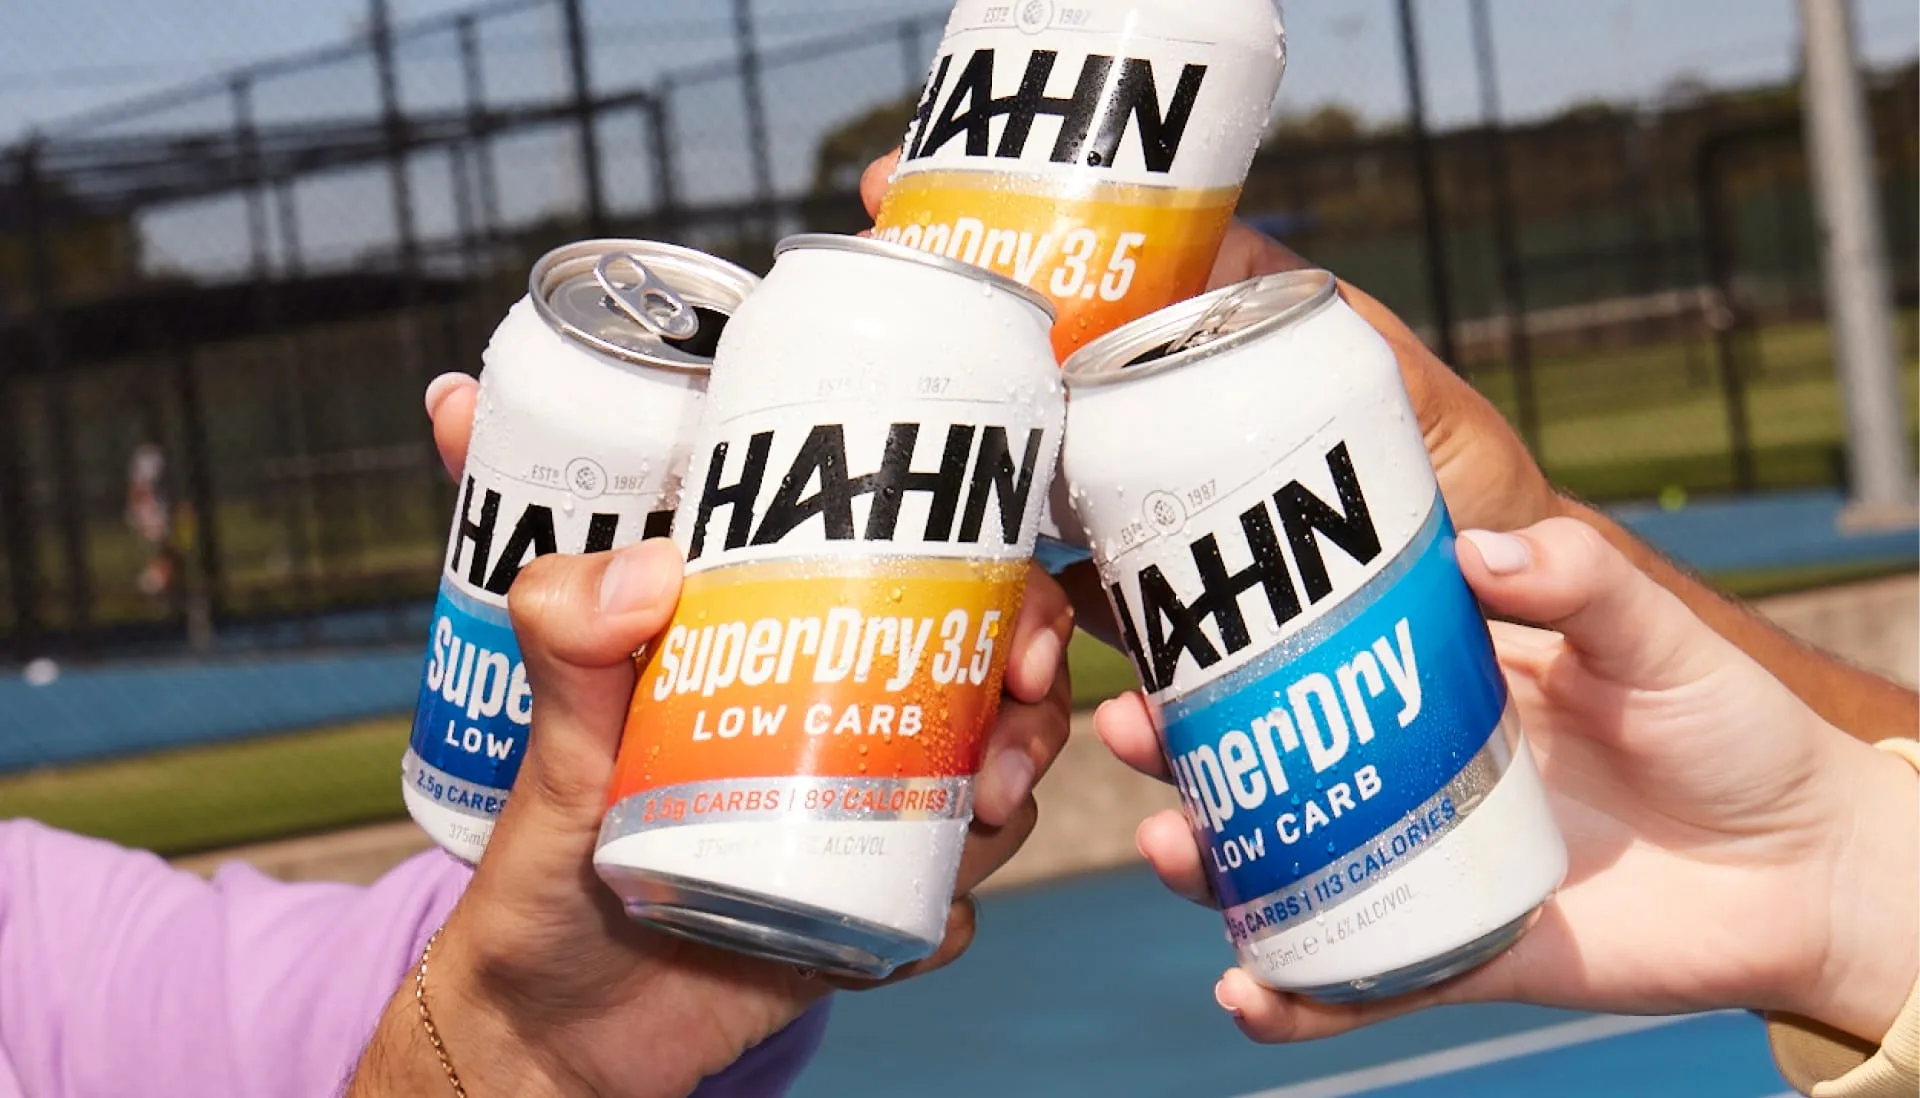 Close-up photo of cans of Hahn SuperDry and SuperDry 3.5 being used for a toast